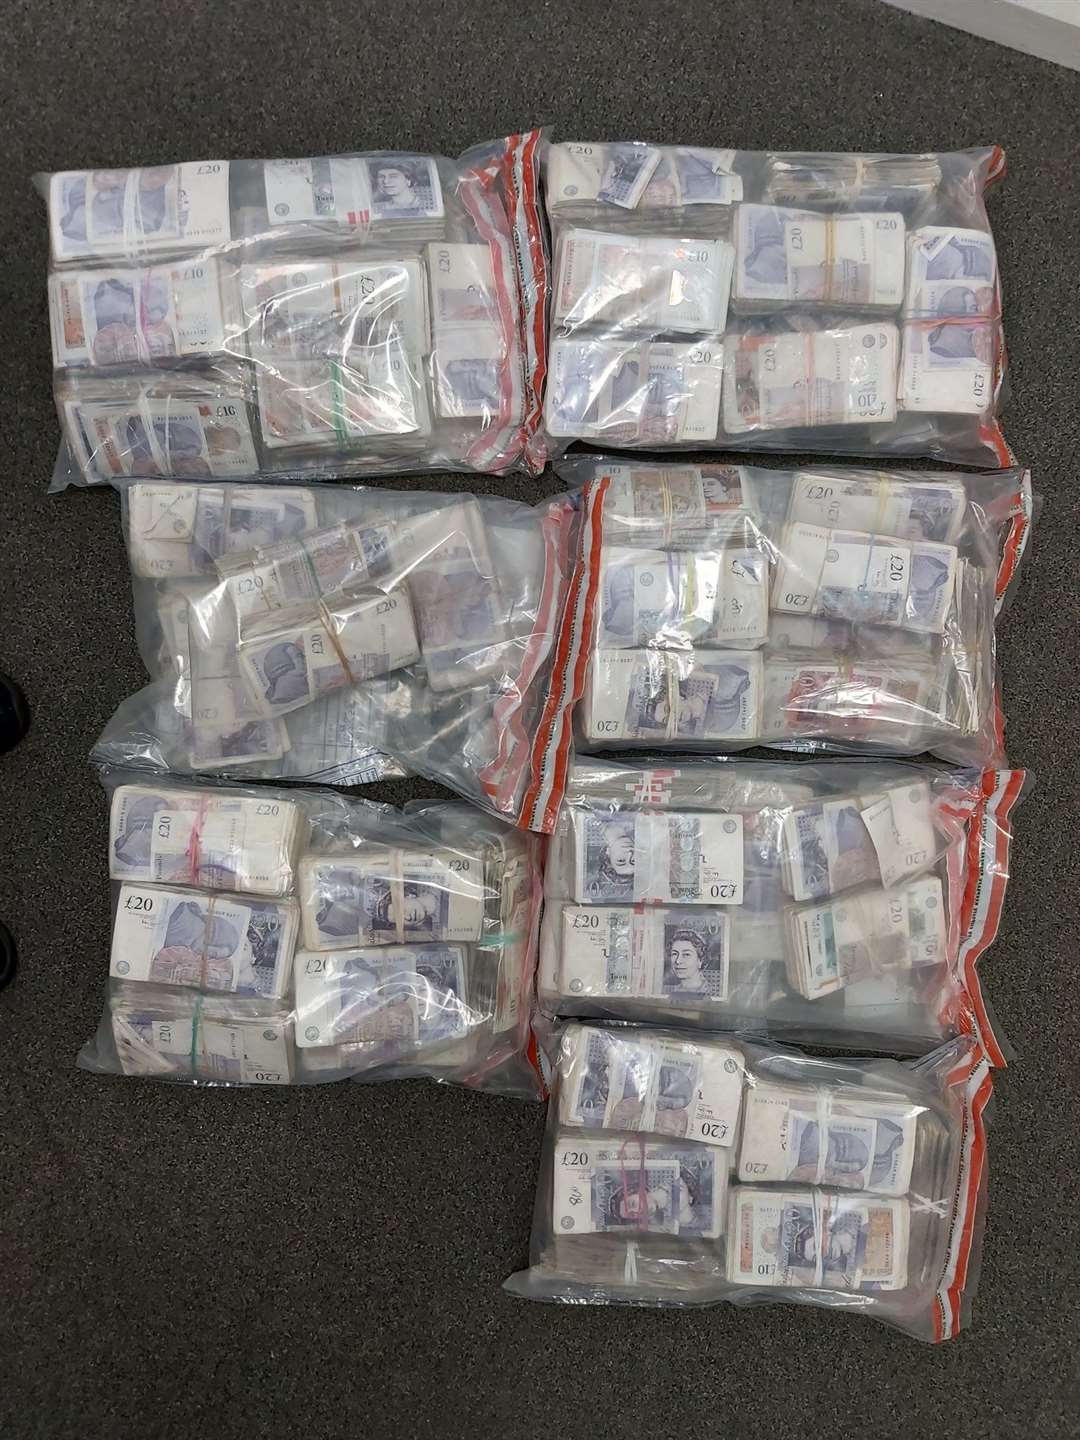 A large quantity of cash was recovered. Picture: Kent Police - Dover, Twitter account